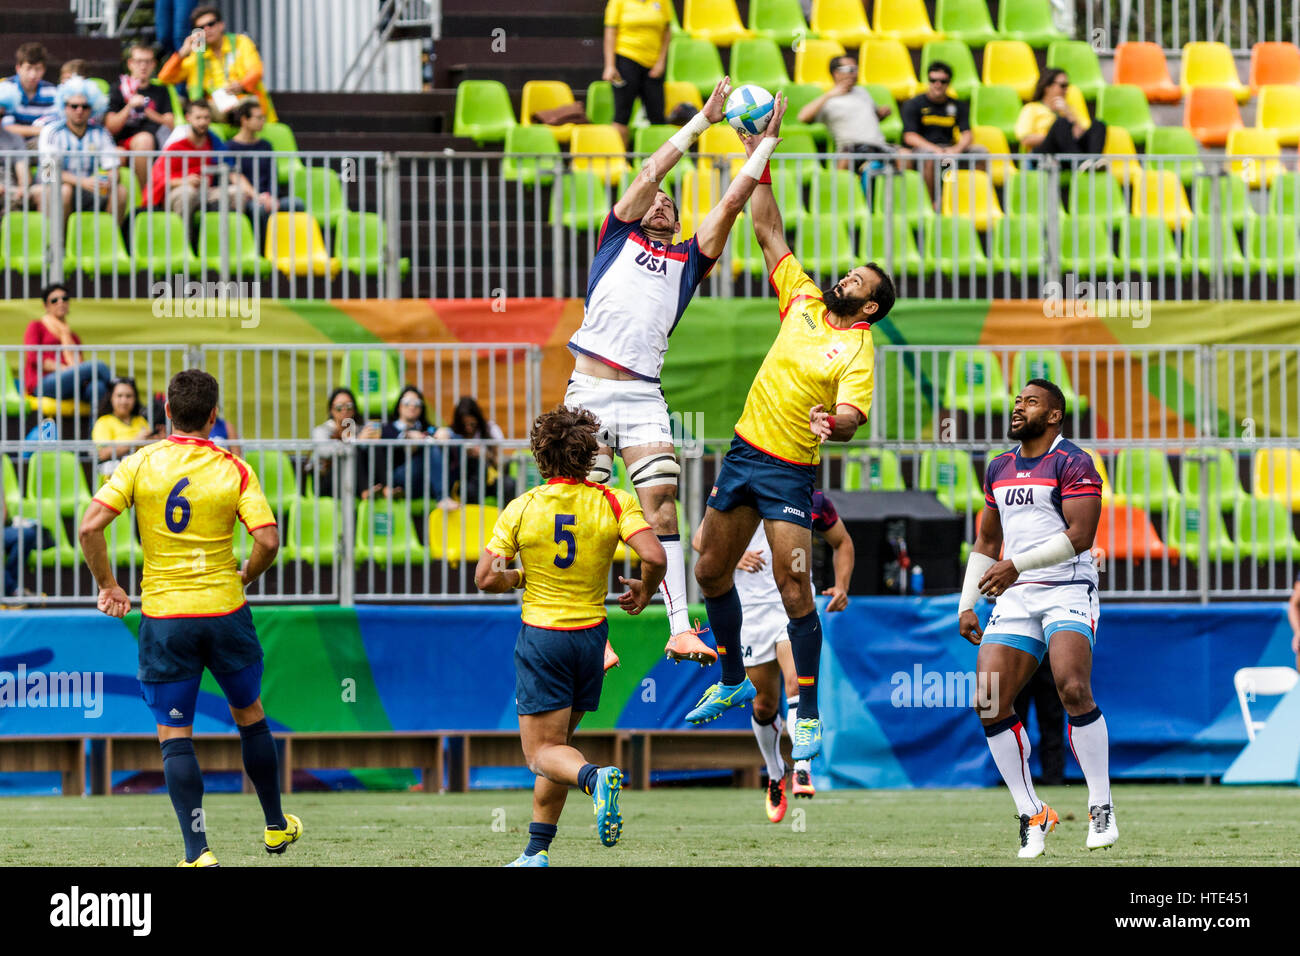 Rio de Janeiro, Brazil. 11 August 2016 Zack Test (USA) and Ignacio Martin (ESP) reach for the ball in the Men's  Rugby Sevens at the 2016 Olympic Summ Stock Photo